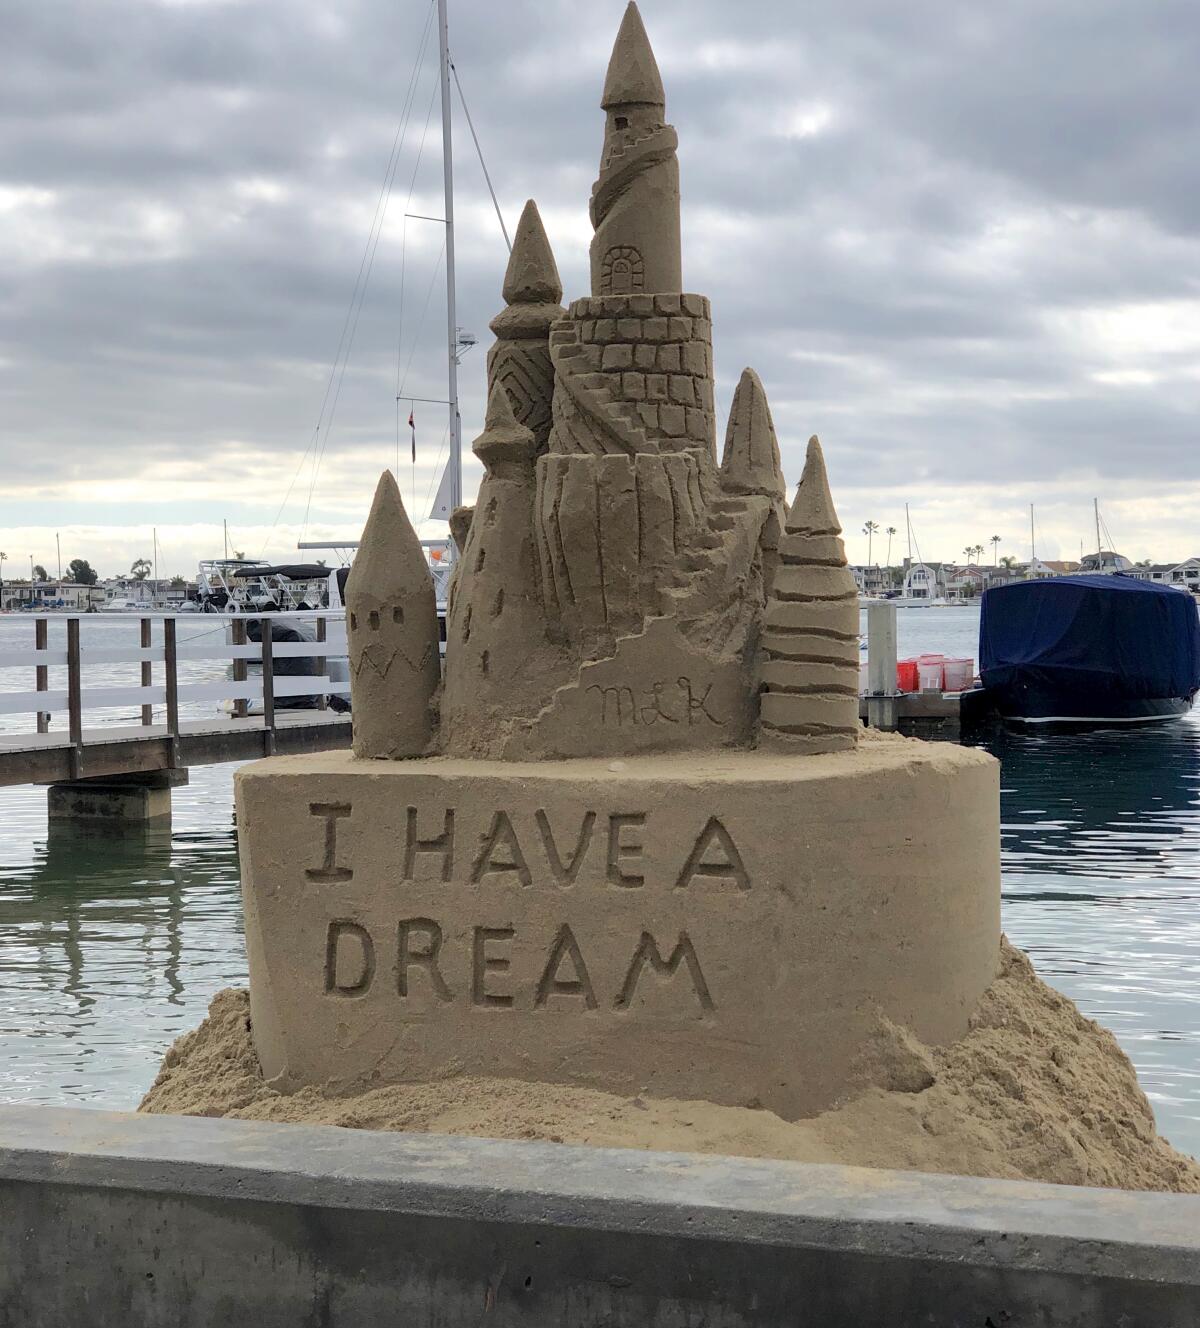 Chris Crosson created a sandcastle on Balboa Island in honor of Martin Luther King, Jr. Day.